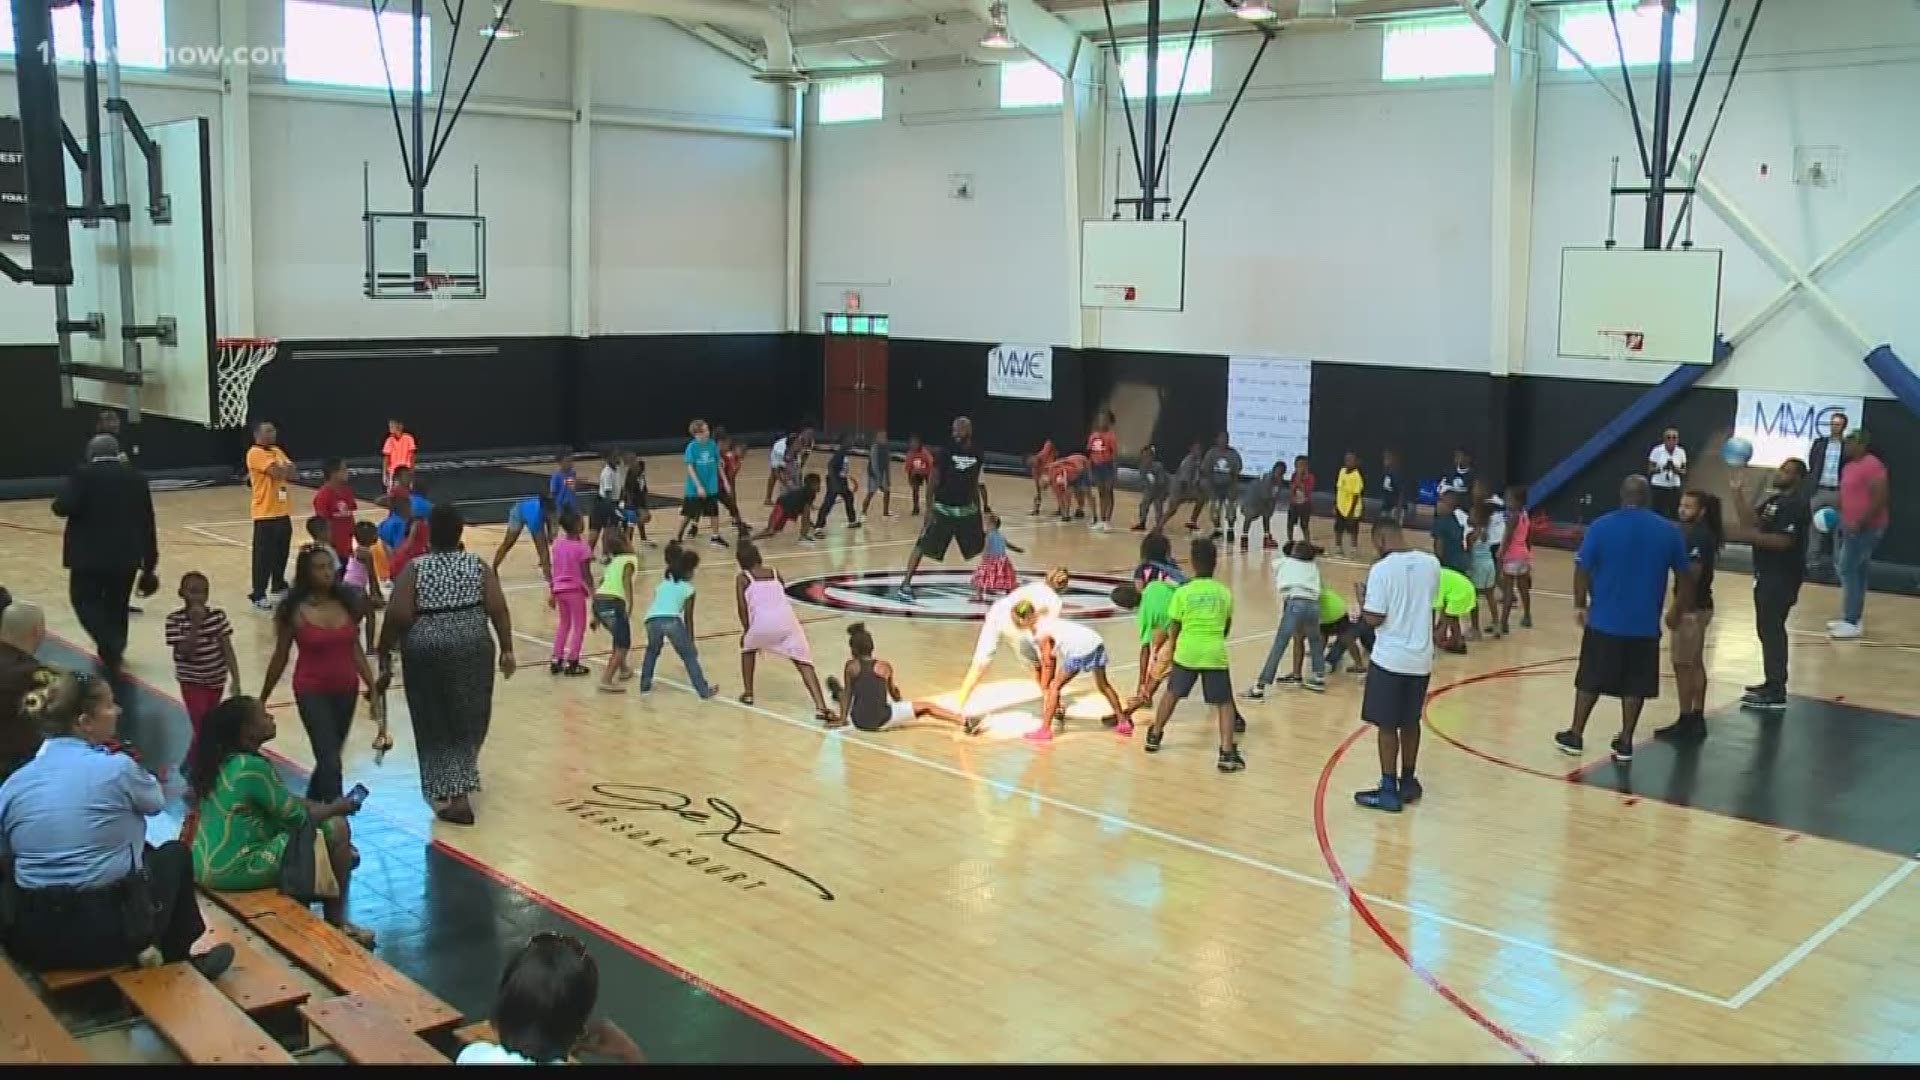 Kids in Newport News will be hitting the hardwood, thanks to a gift from A I!